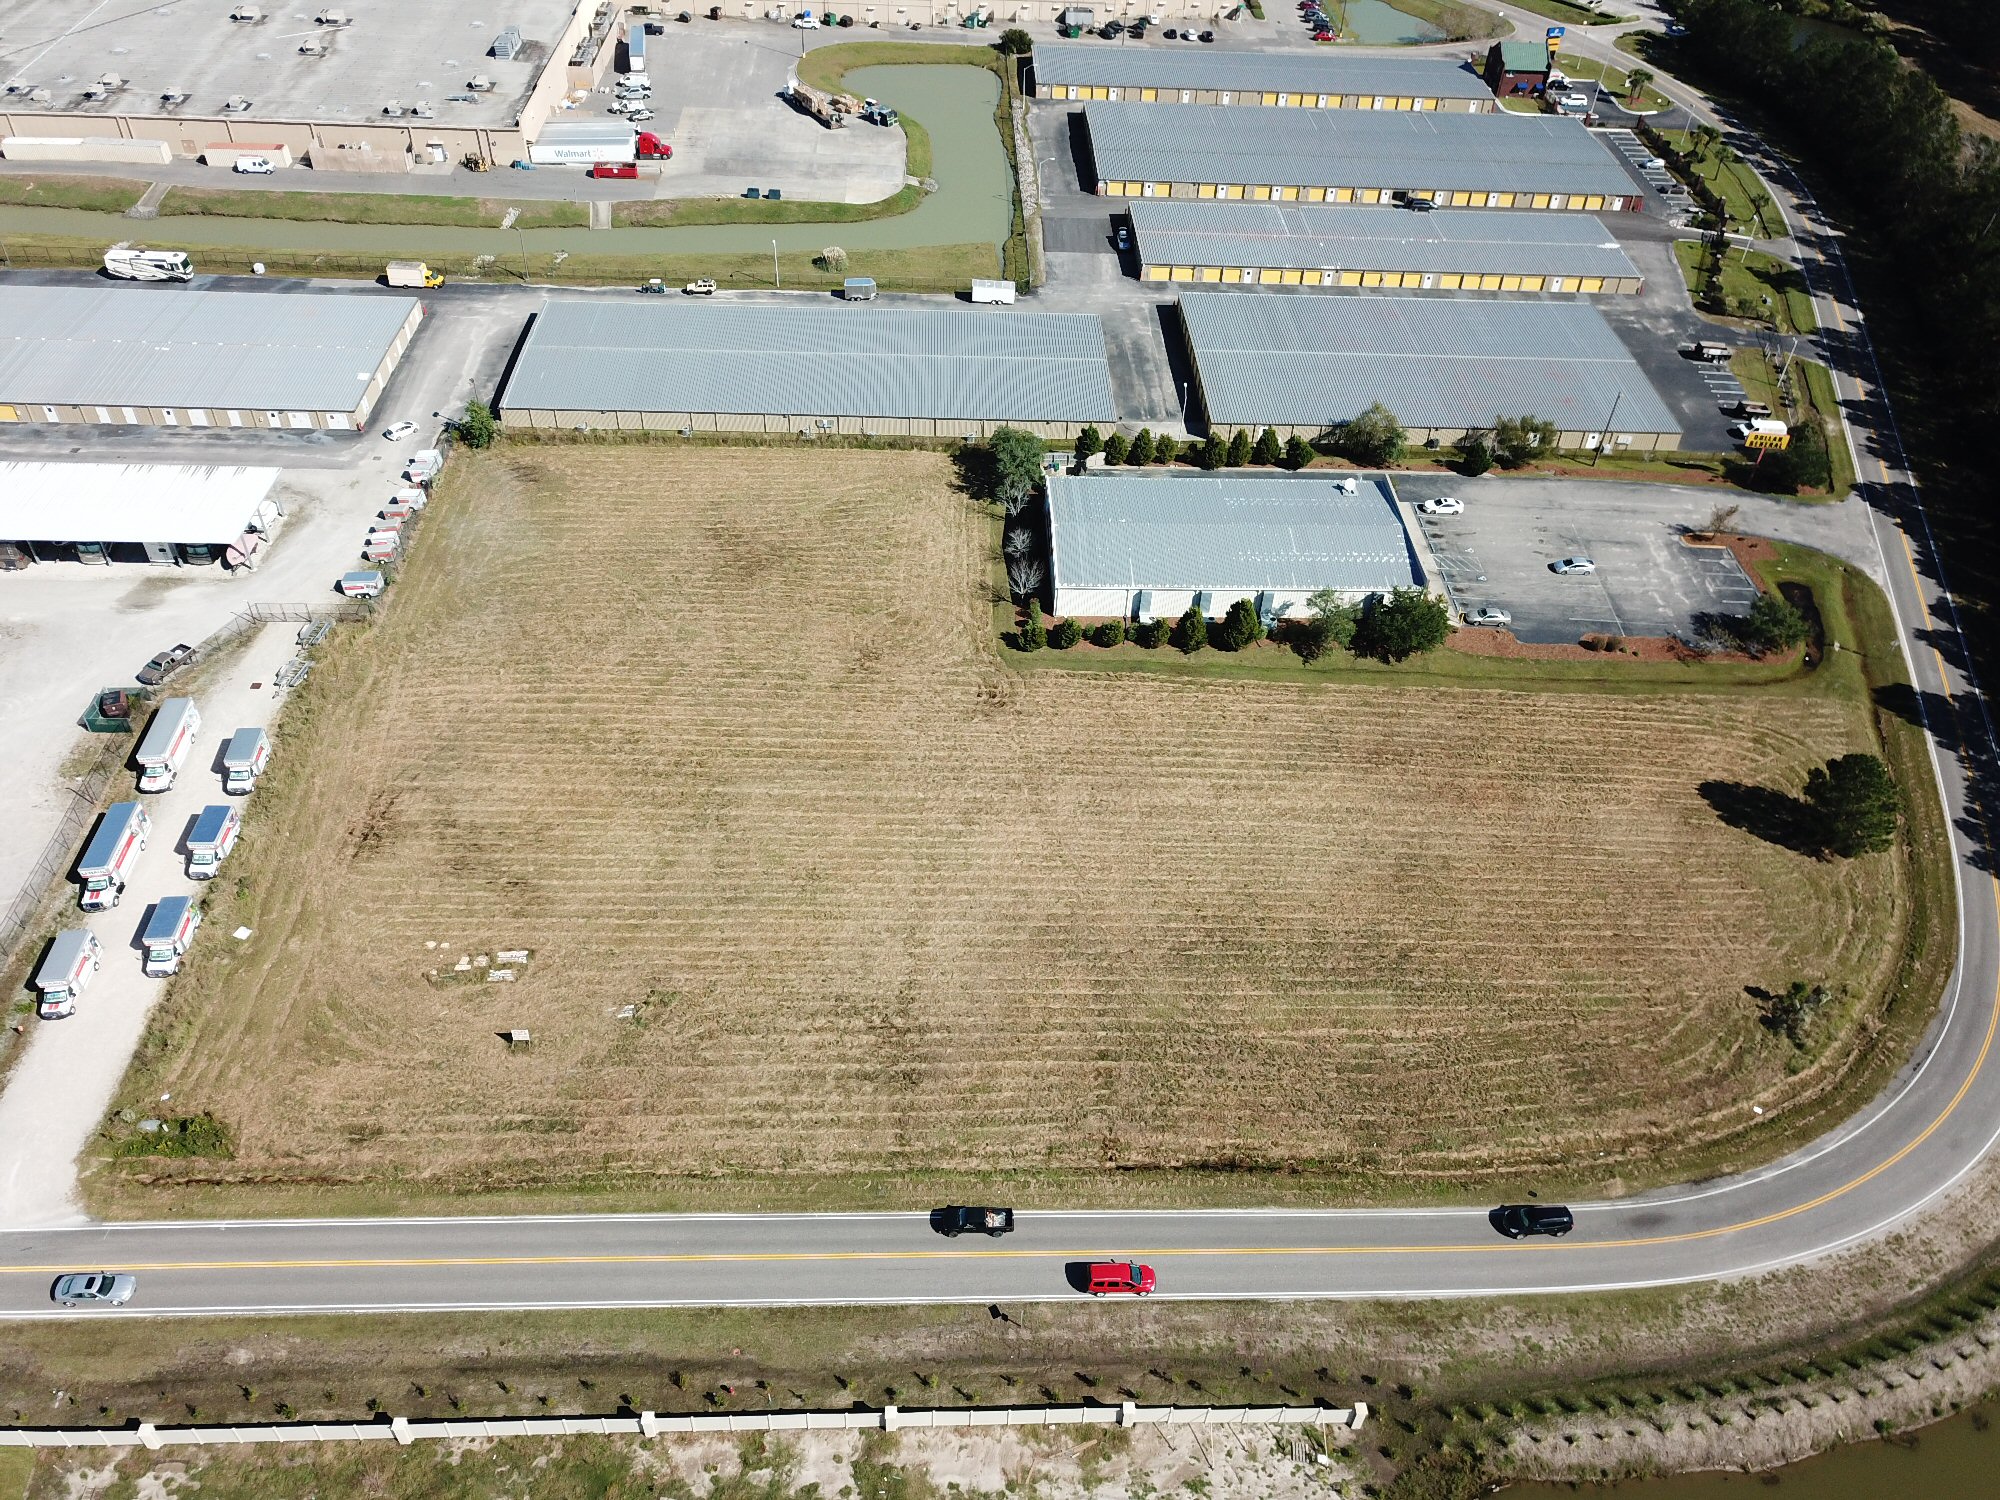 Wal-Mart Tract Parcel B Drone Image 4